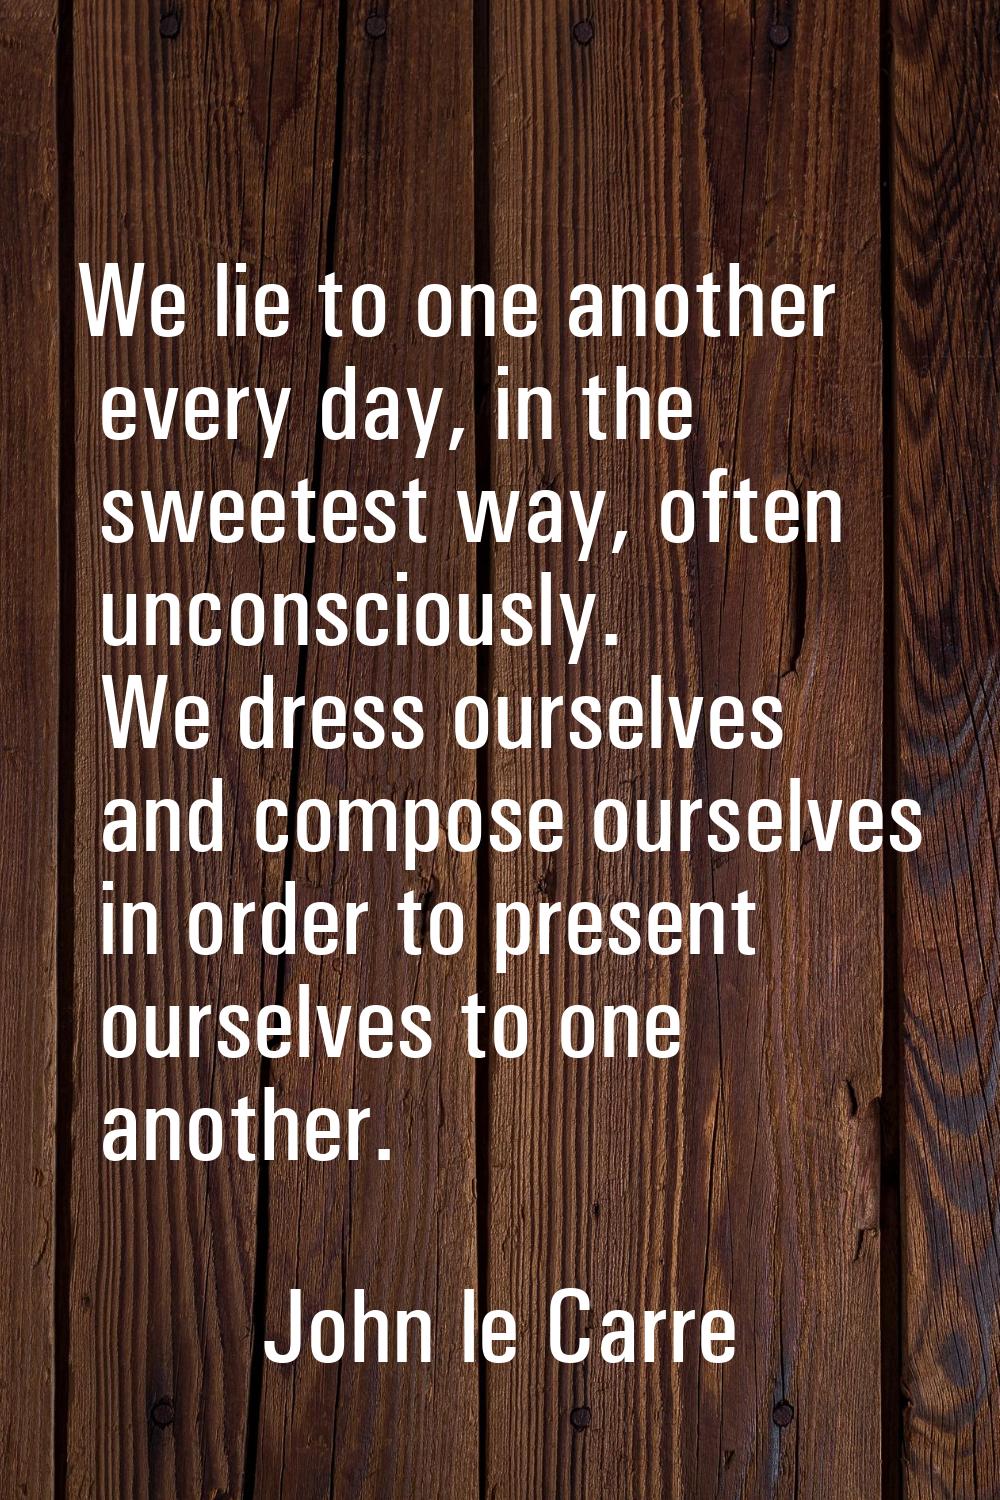 We lie to one another every day, in the sweetest way, often unconsciously. We dress ourselves and c